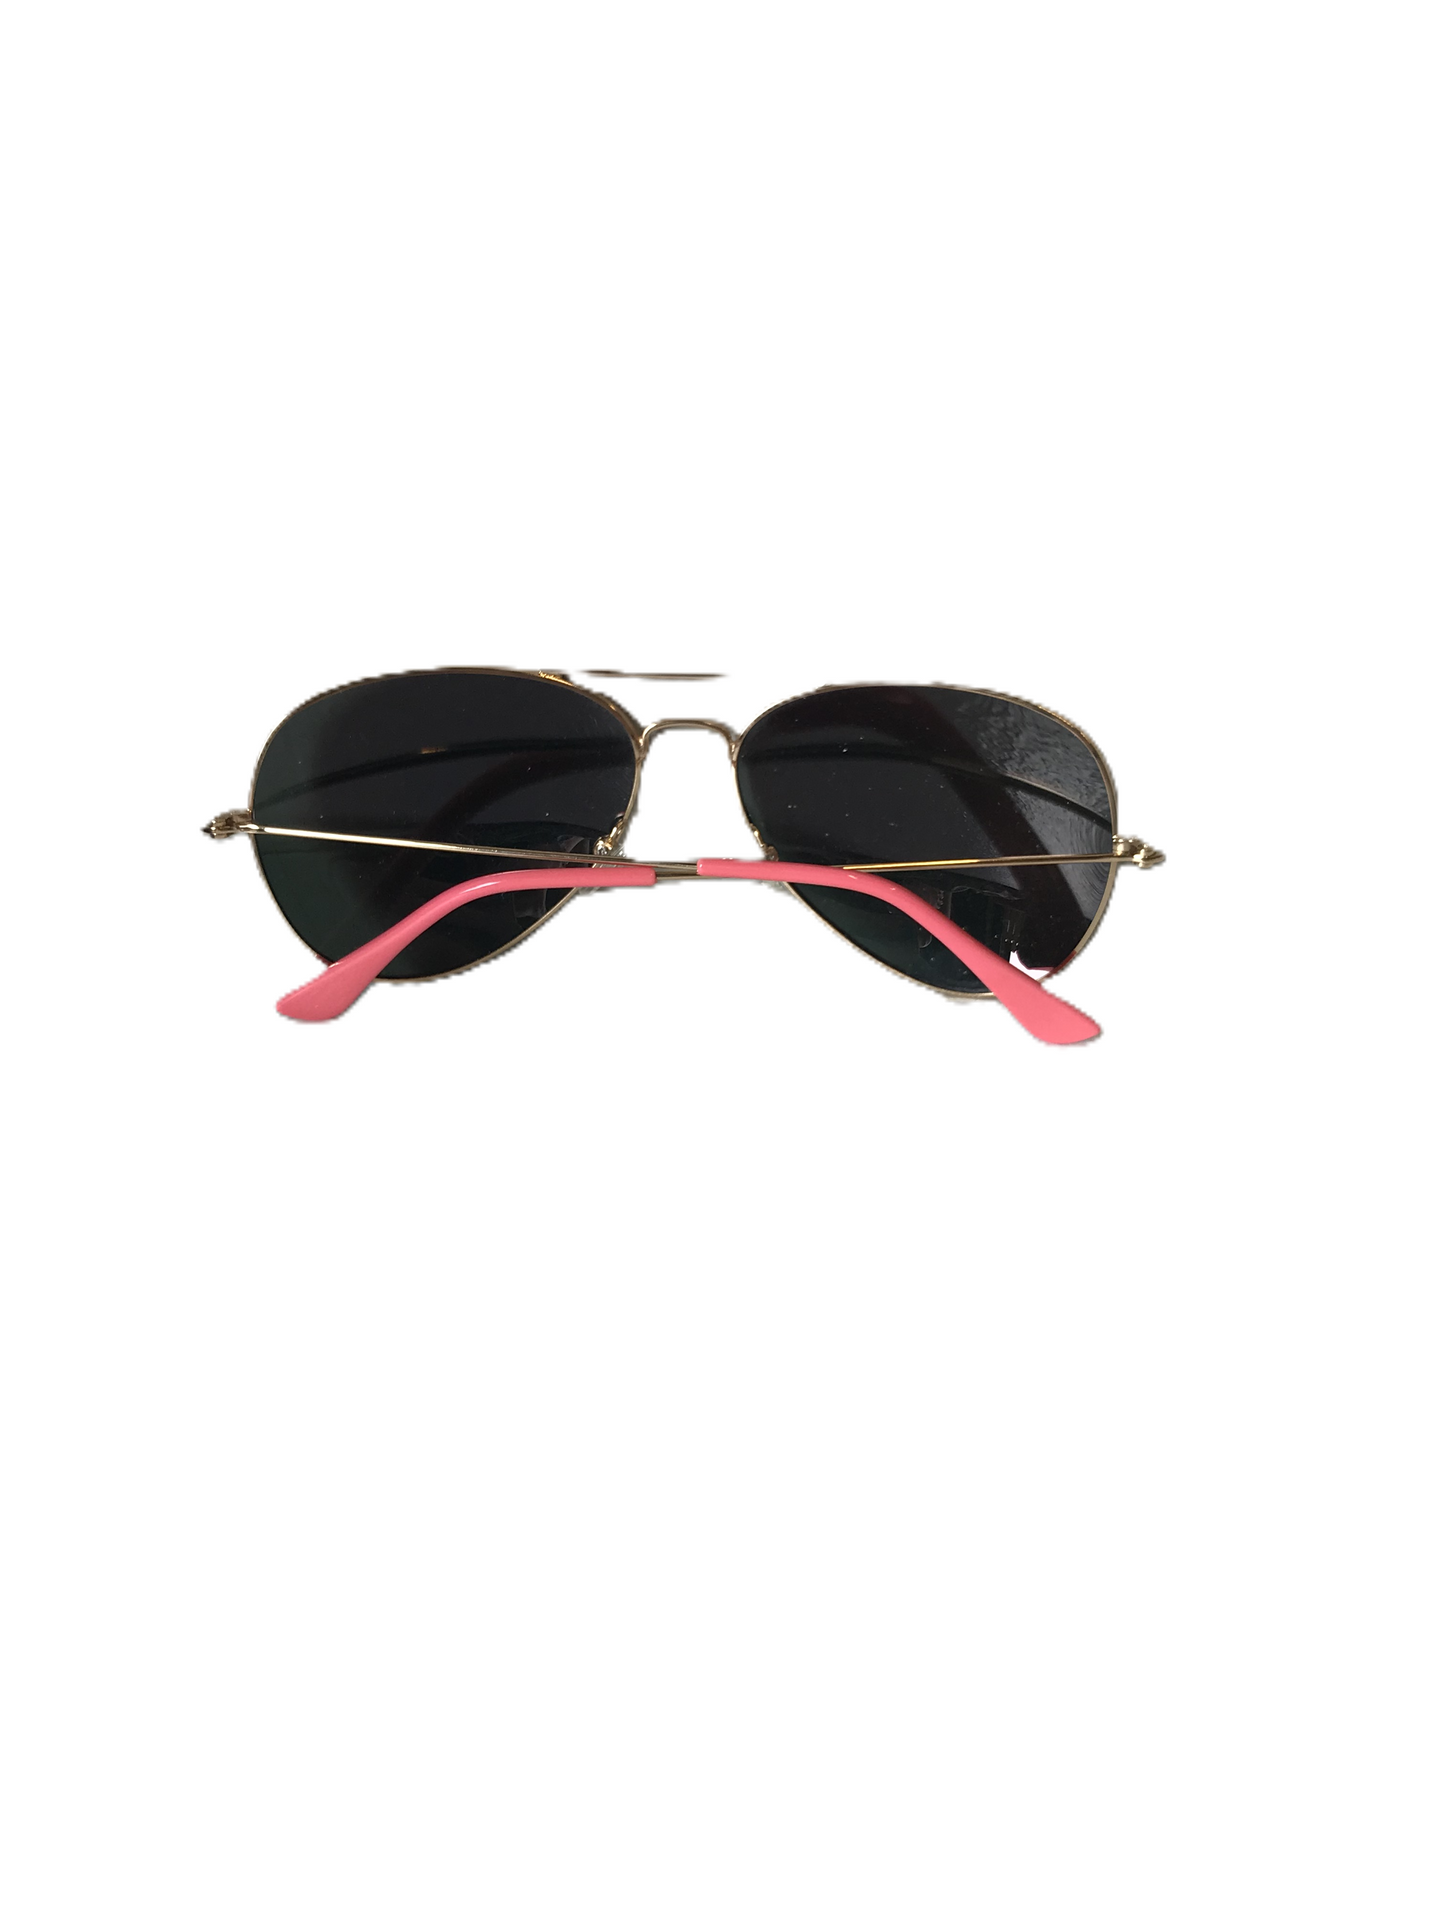 Sunglasses By Lilly Pulitzer